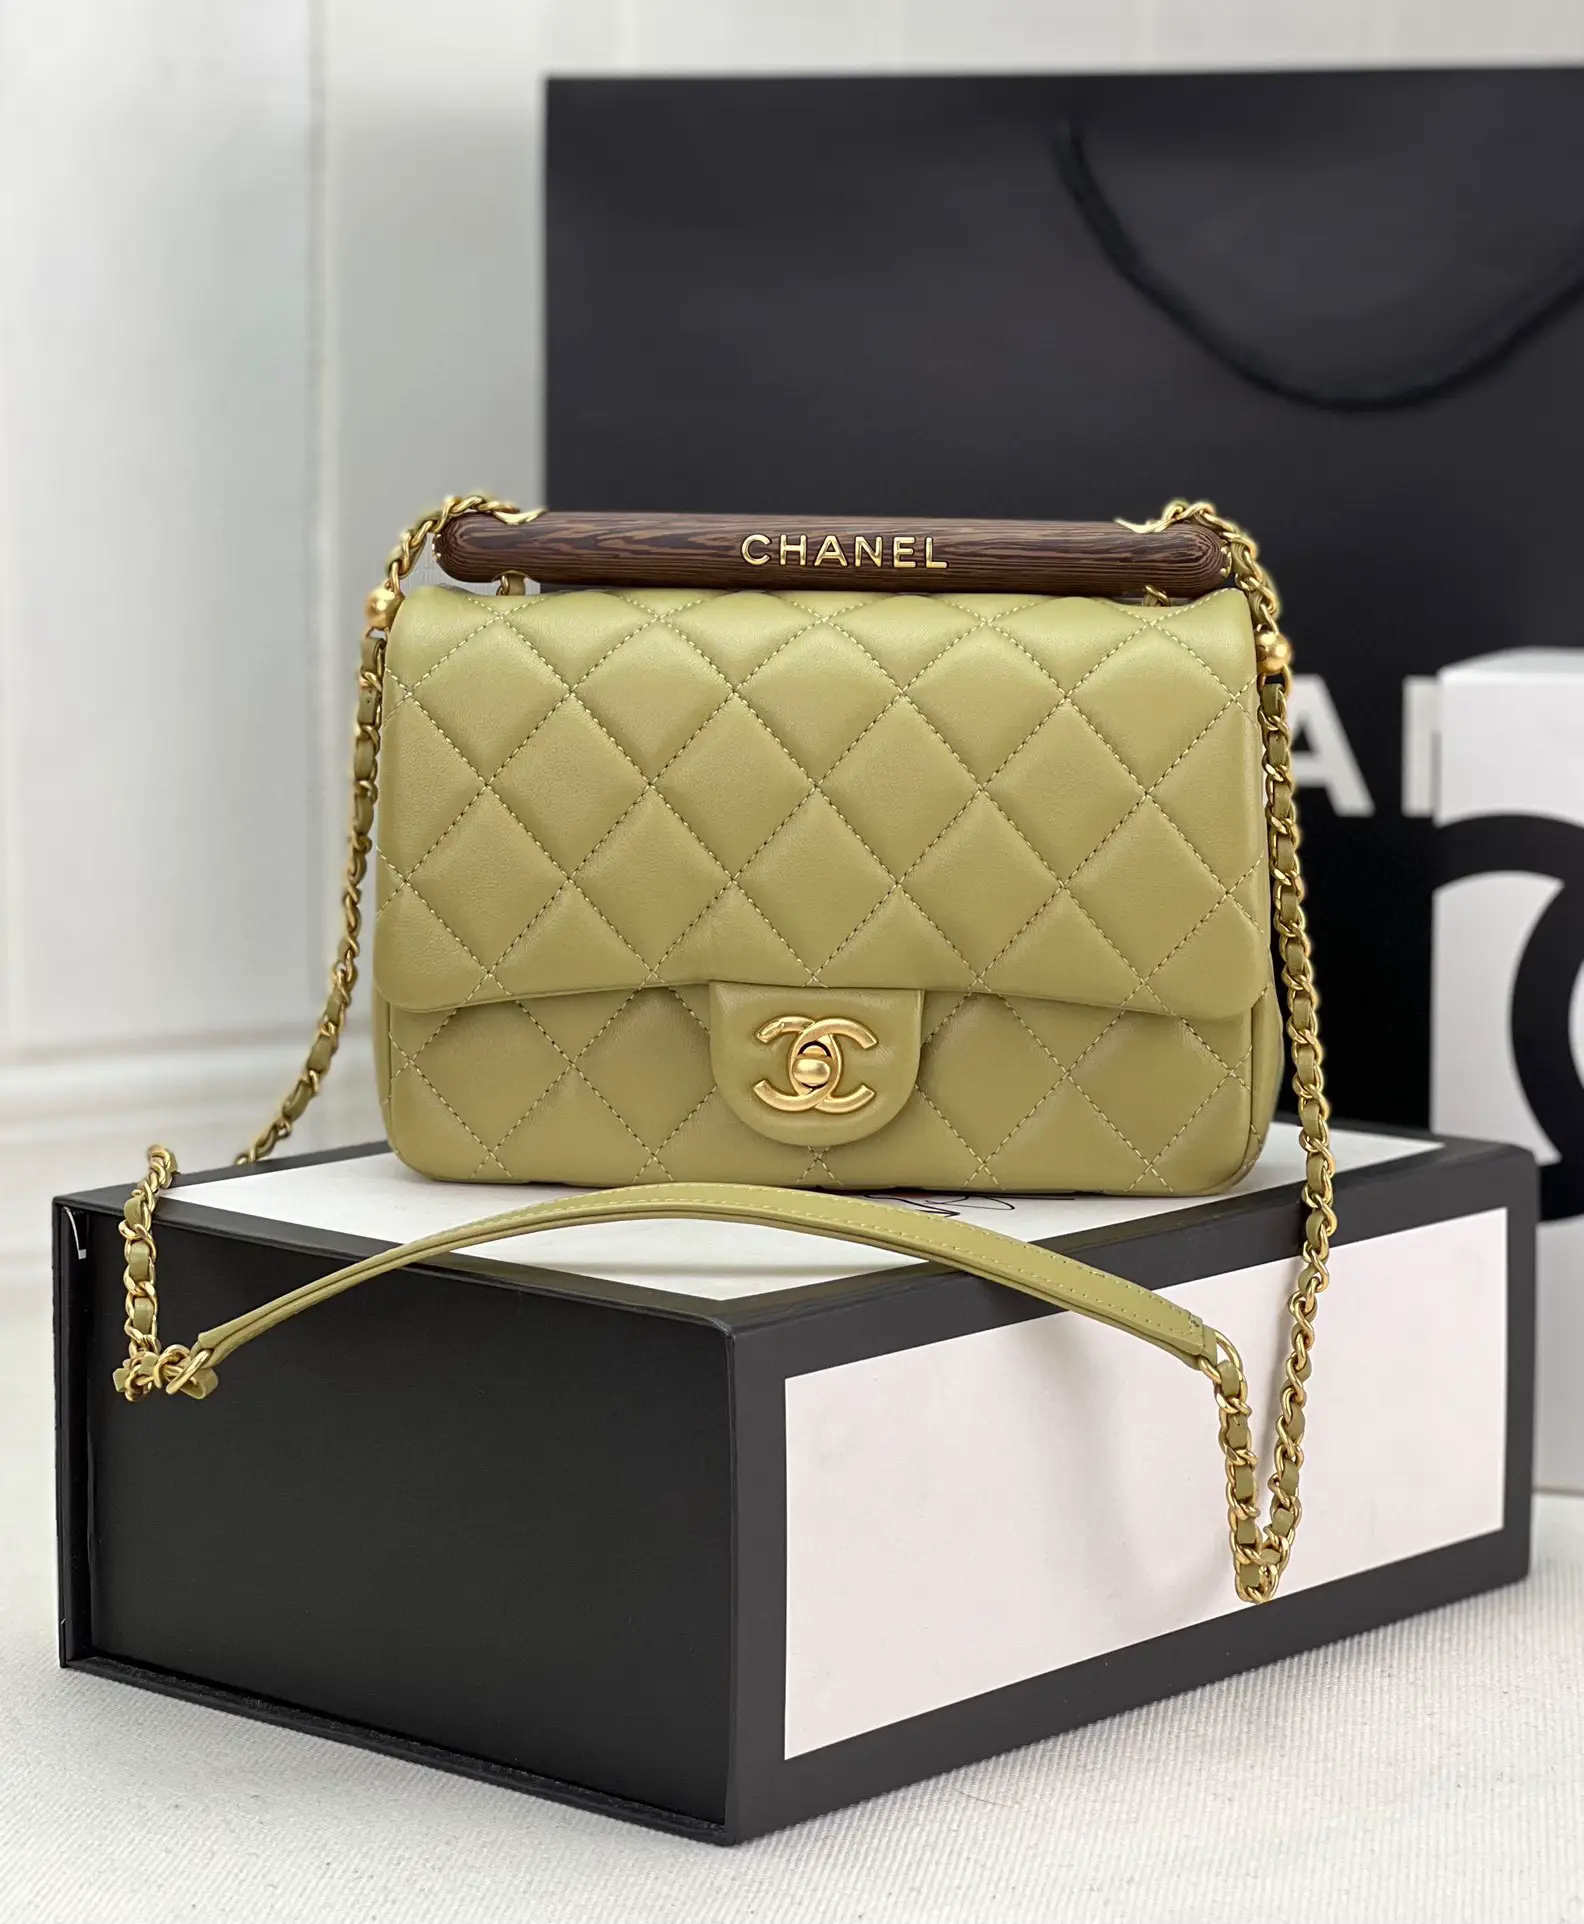 CHANEL bags, Gallery posted by alfred karathri